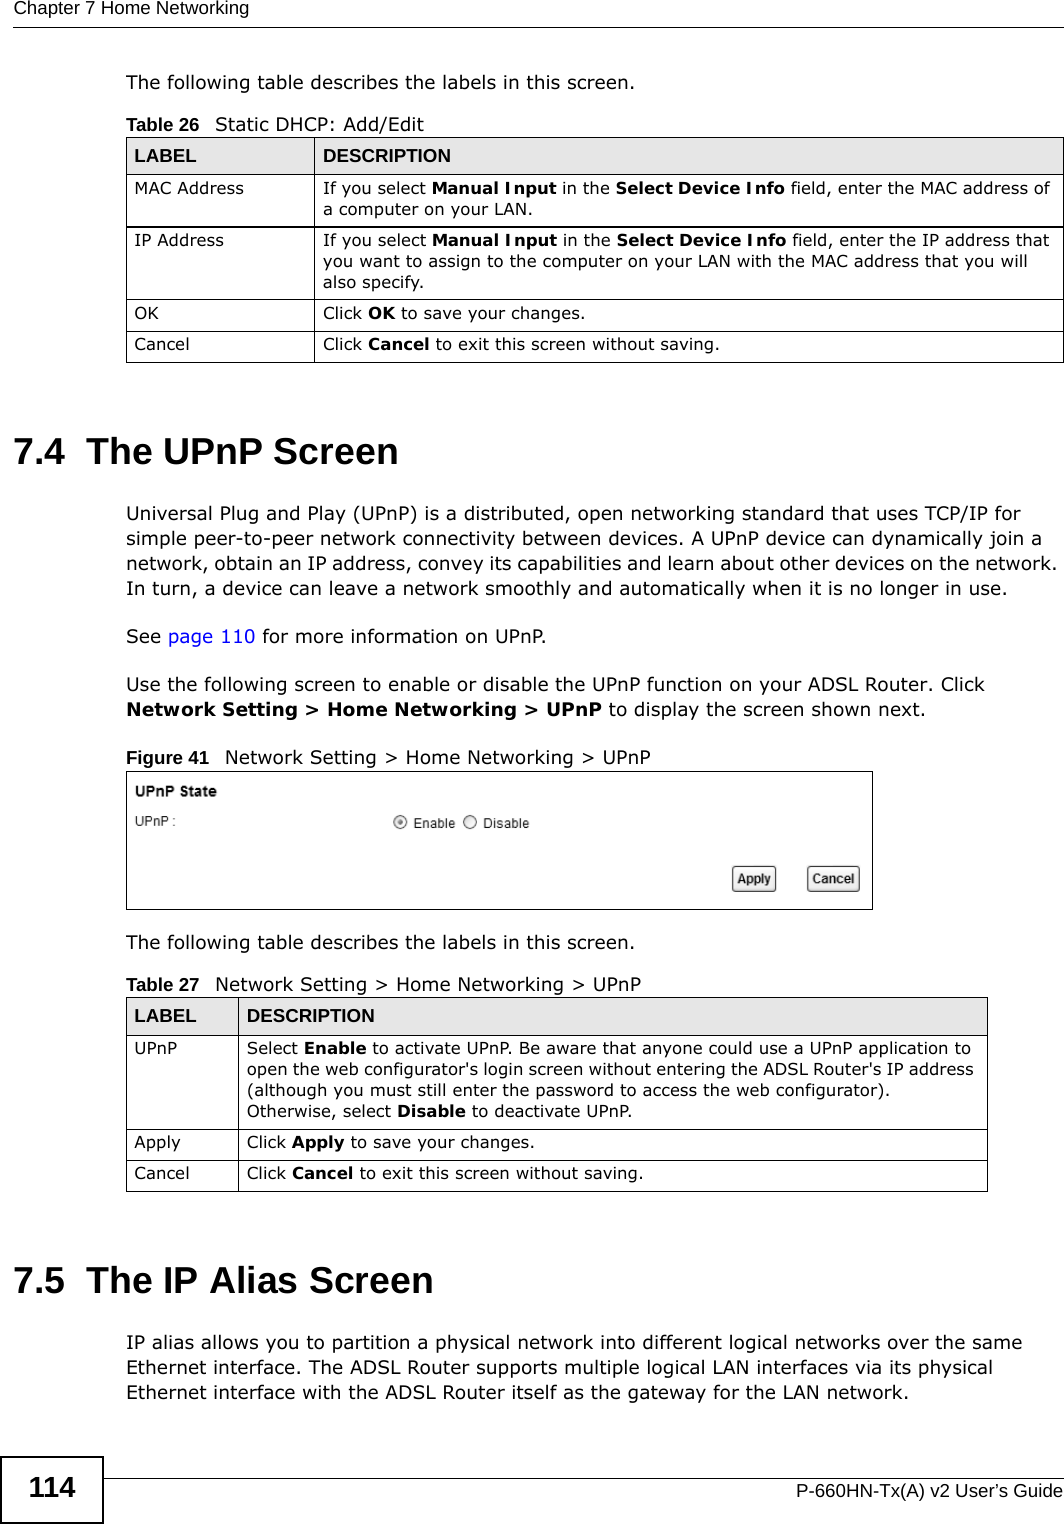 Chapter 7 Home NetworkingP-660HN-Tx(A) v2 User’s Guide114The following table describes the labels in this screen.7.4  The UPnP ScreenUniversal Plug and Play (UPnP) is a distributed, open networking standard that uses TCP/IP for simple peer-to-peer network connectivity between devices. A UPnP device can dynamically join a network, obtain an IP address, convey its capabilities and learn about other devices on the network. In turn, a device can leave a network smoothly and automatically when it is no longer in use.See page 110 for more information on UPnP.Use the following screen to enable or disable the UPnP function on your ADSL Router. Click Network Setting &gt; Home Networking &gt; UPnP to display the screen shown next.Figure 41   Network Setting &gt; Home Networking &gt; UPnPThe following table describes the labels in this screen.7.5  The IP Alias ScreenIP alias allows you to partition a physical network into different logical networks over the same Ethernet interface. The ADSL Router supports multiple logical LAN interfaces via its physical Ethernet interface with the ADSL Router itself as the gateway for the LAN network.Table 26   Static DHCP: Add/EditLABEL DESCRIPTIONMAC Address If you select Manual Input in the Select Device Info field, enter the MAC address of a computer on your LAN.IP Address If you select Manual Input in the Select Device Info field, enter the IP address that you want to assign to the computer on your LAN with the MAC address that you will also specify.OK Click OK to save your changes.Cancel Click Cancel to exit this screen without saving.Table 27   Network Setting &gt; Home Networking &gt; UPnPLABEL DESCRIPTIONUPnP Select Enable to activate UPnP. Be aware that anyone could use a UPnP application to open the web configurator&apos;s login screen without entering the ADSL Router&apos;s IP address (although you must still enter the password to access the web configurator). Otherwise, select Disable to deactivate UPnP.Apply Click Apply to save your changes.Cancel Click Cancel to exit this screen without saving.